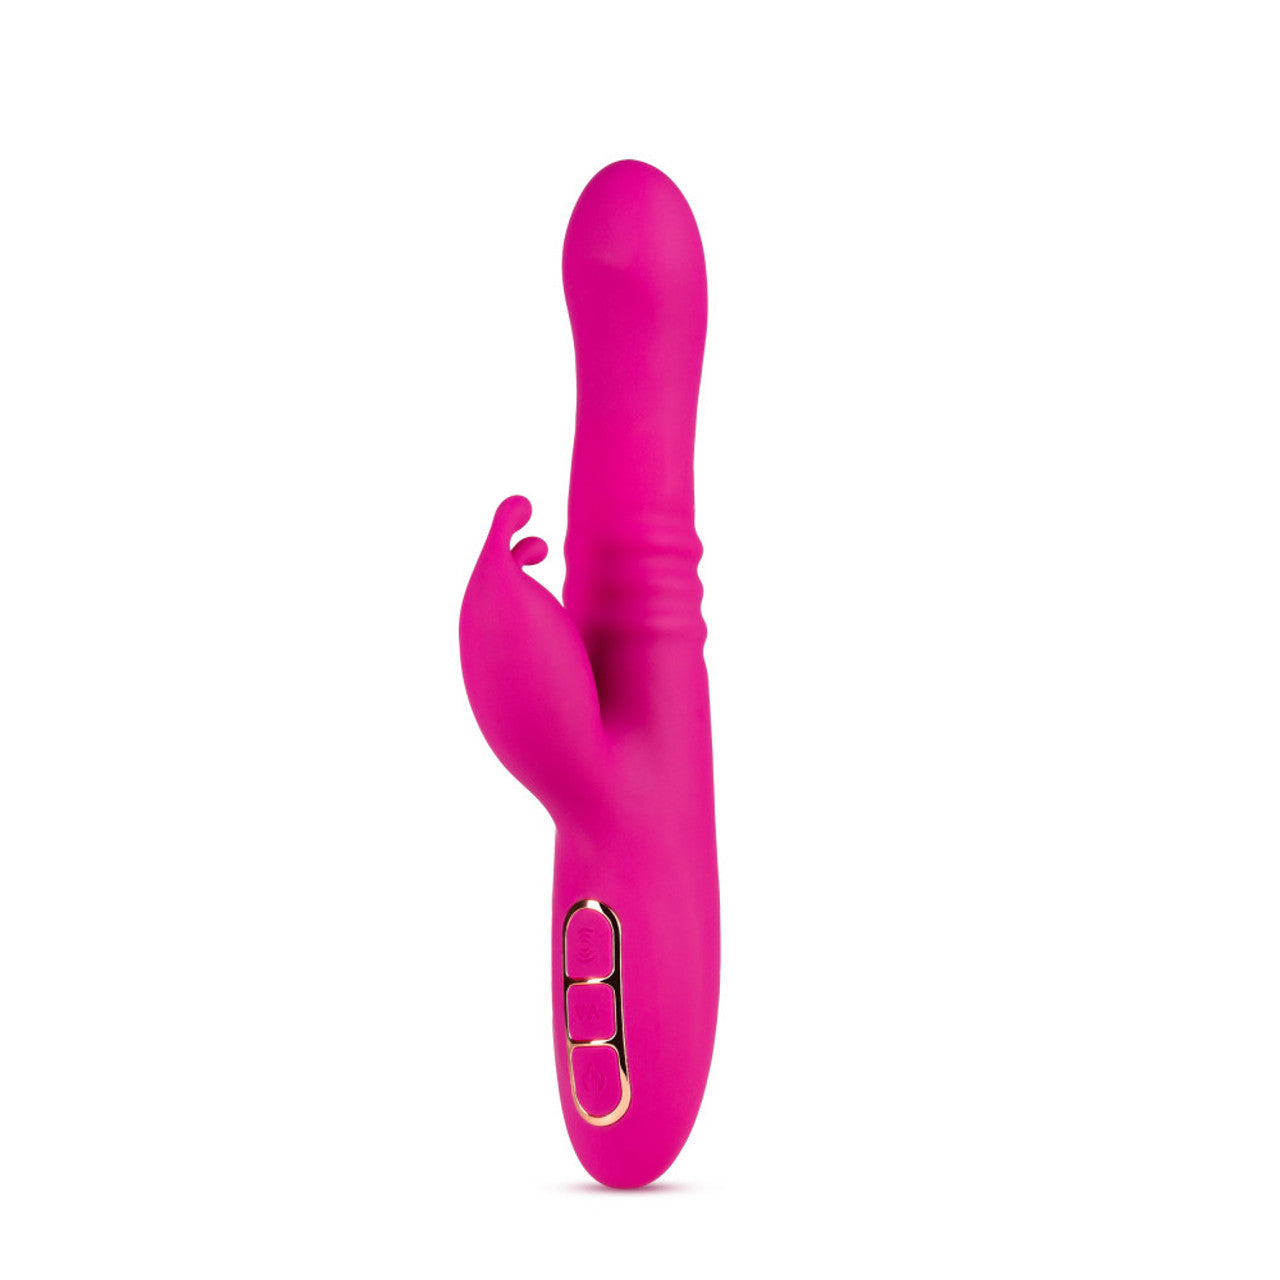 Lush Kira Rechargeable Silicone Dual Stimulation Rabbit Vibrator By Blush - Velvet Pink - Thorn & Feather Sex Toy Canada